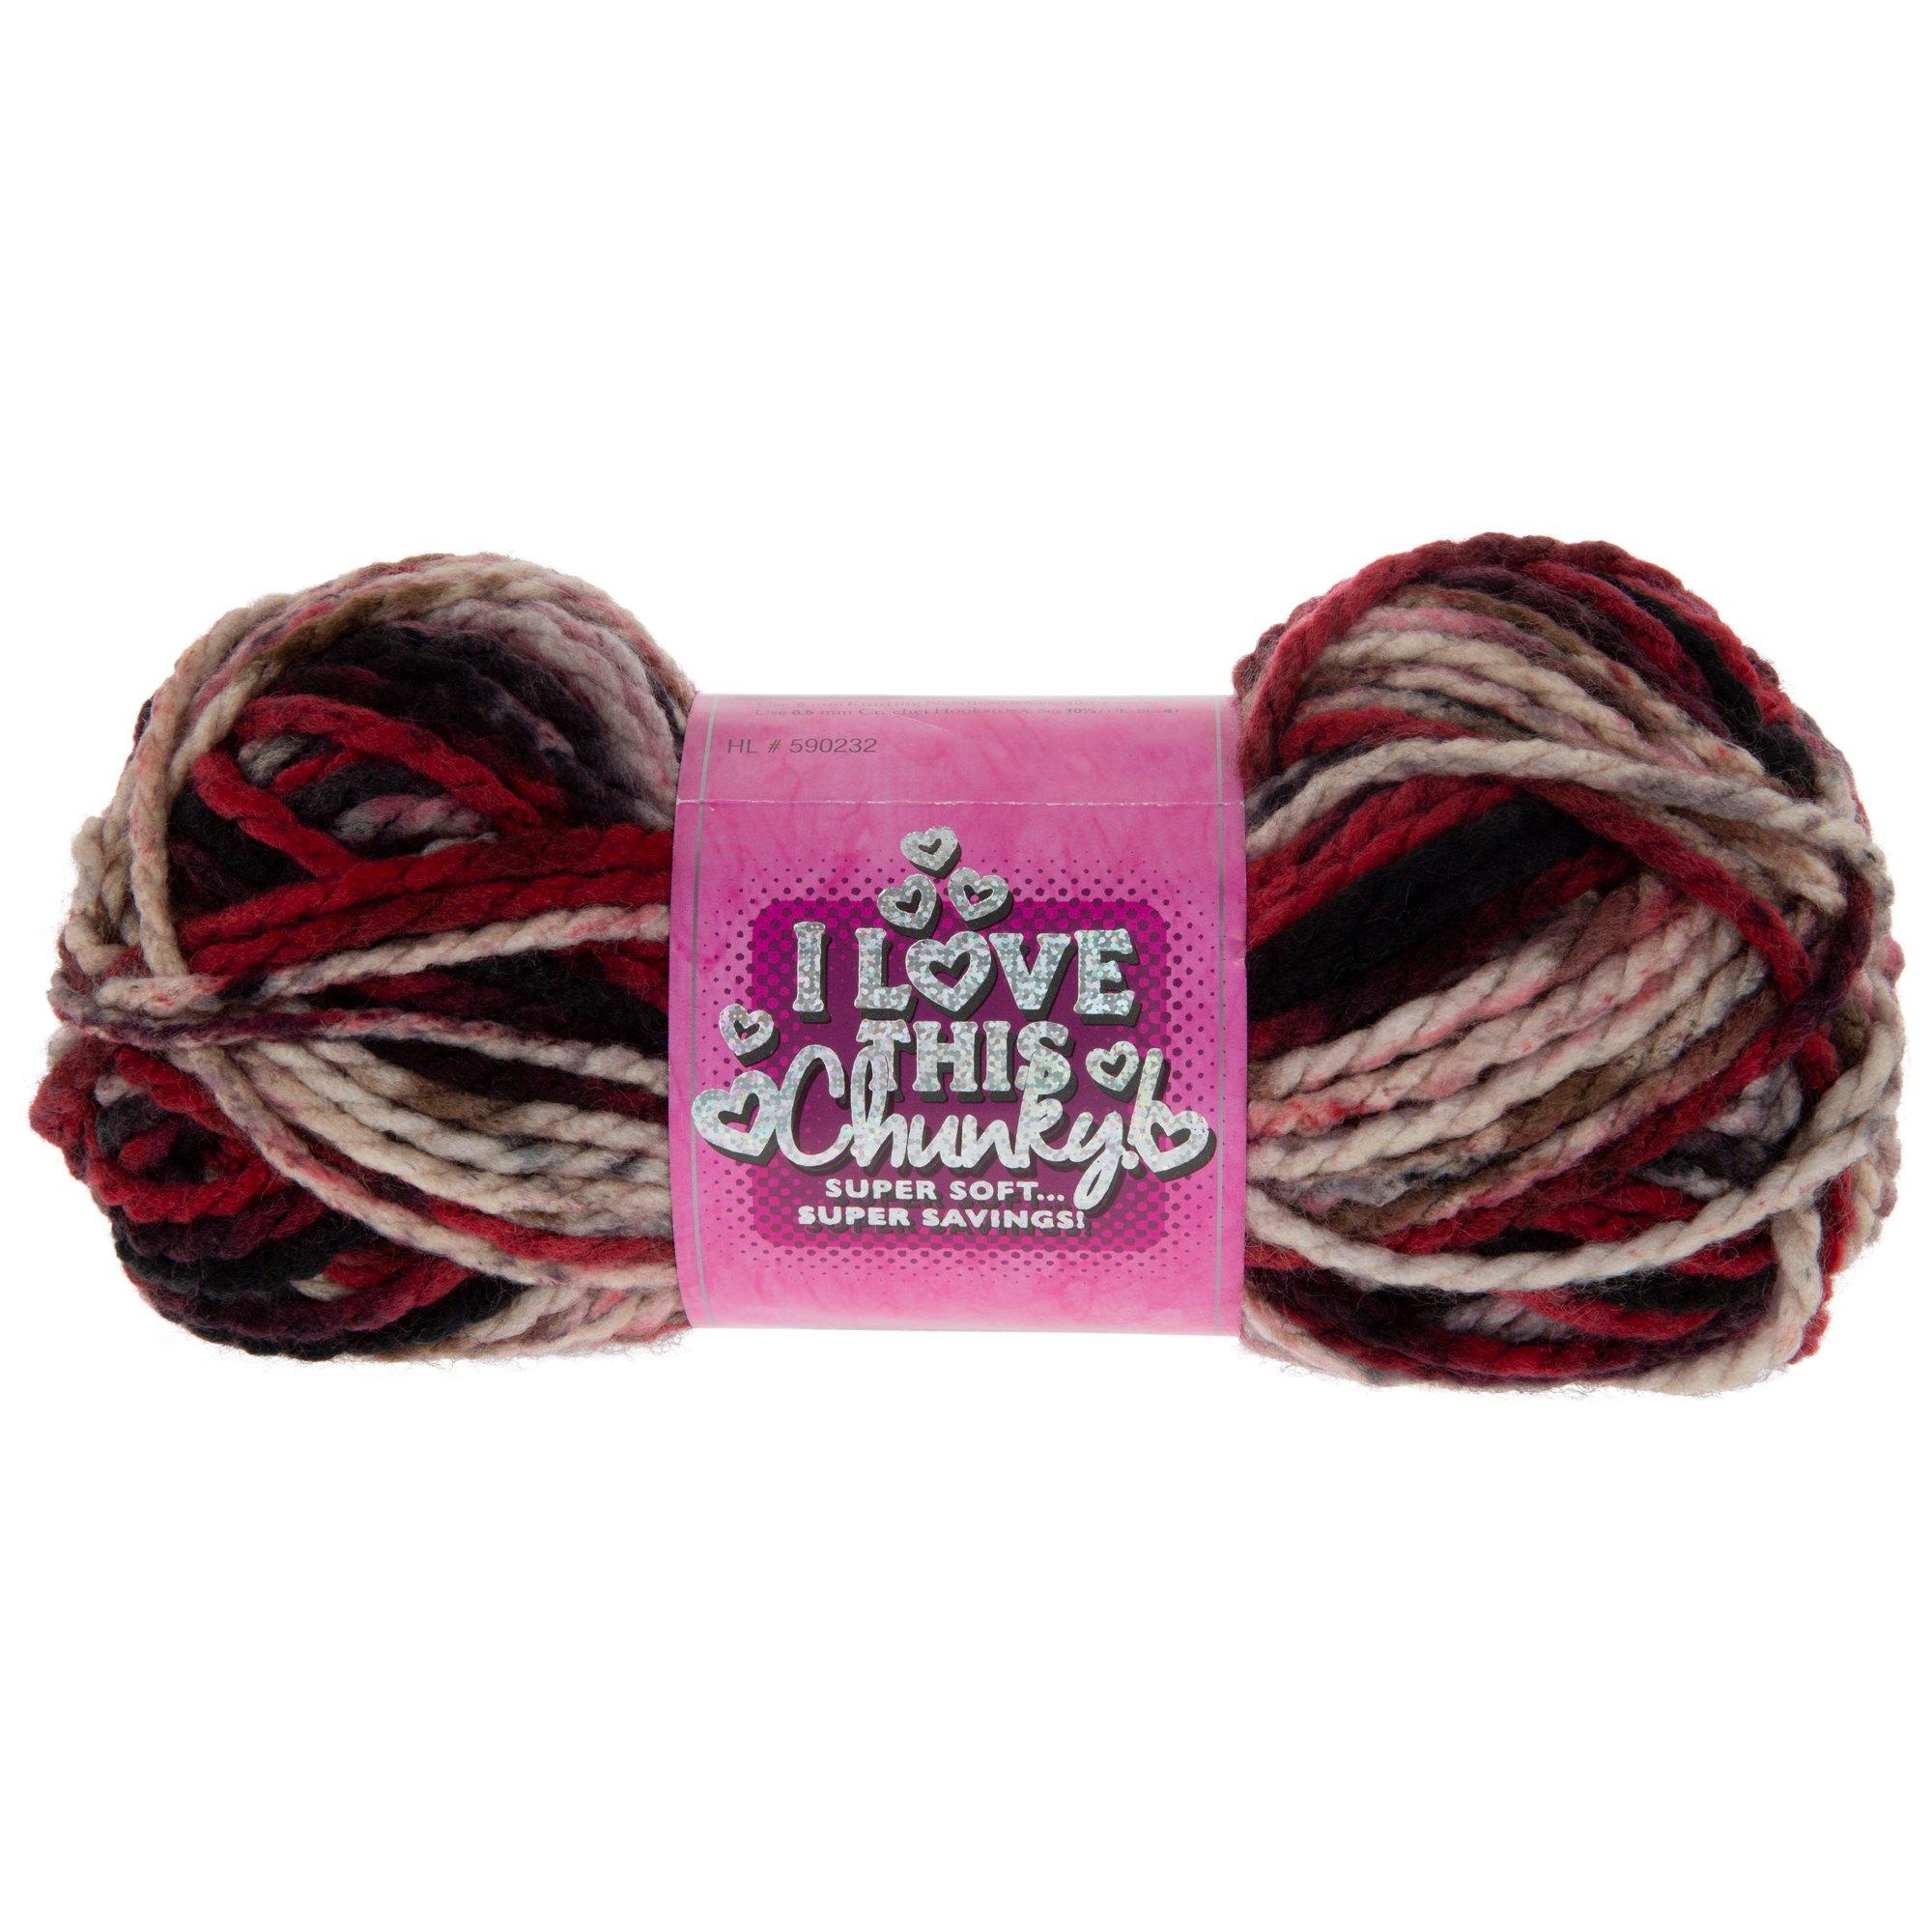 Hobby Lobby, Office, Skeins Hobby Lobby I Love This Cotton Yarn Reds And  Oranges